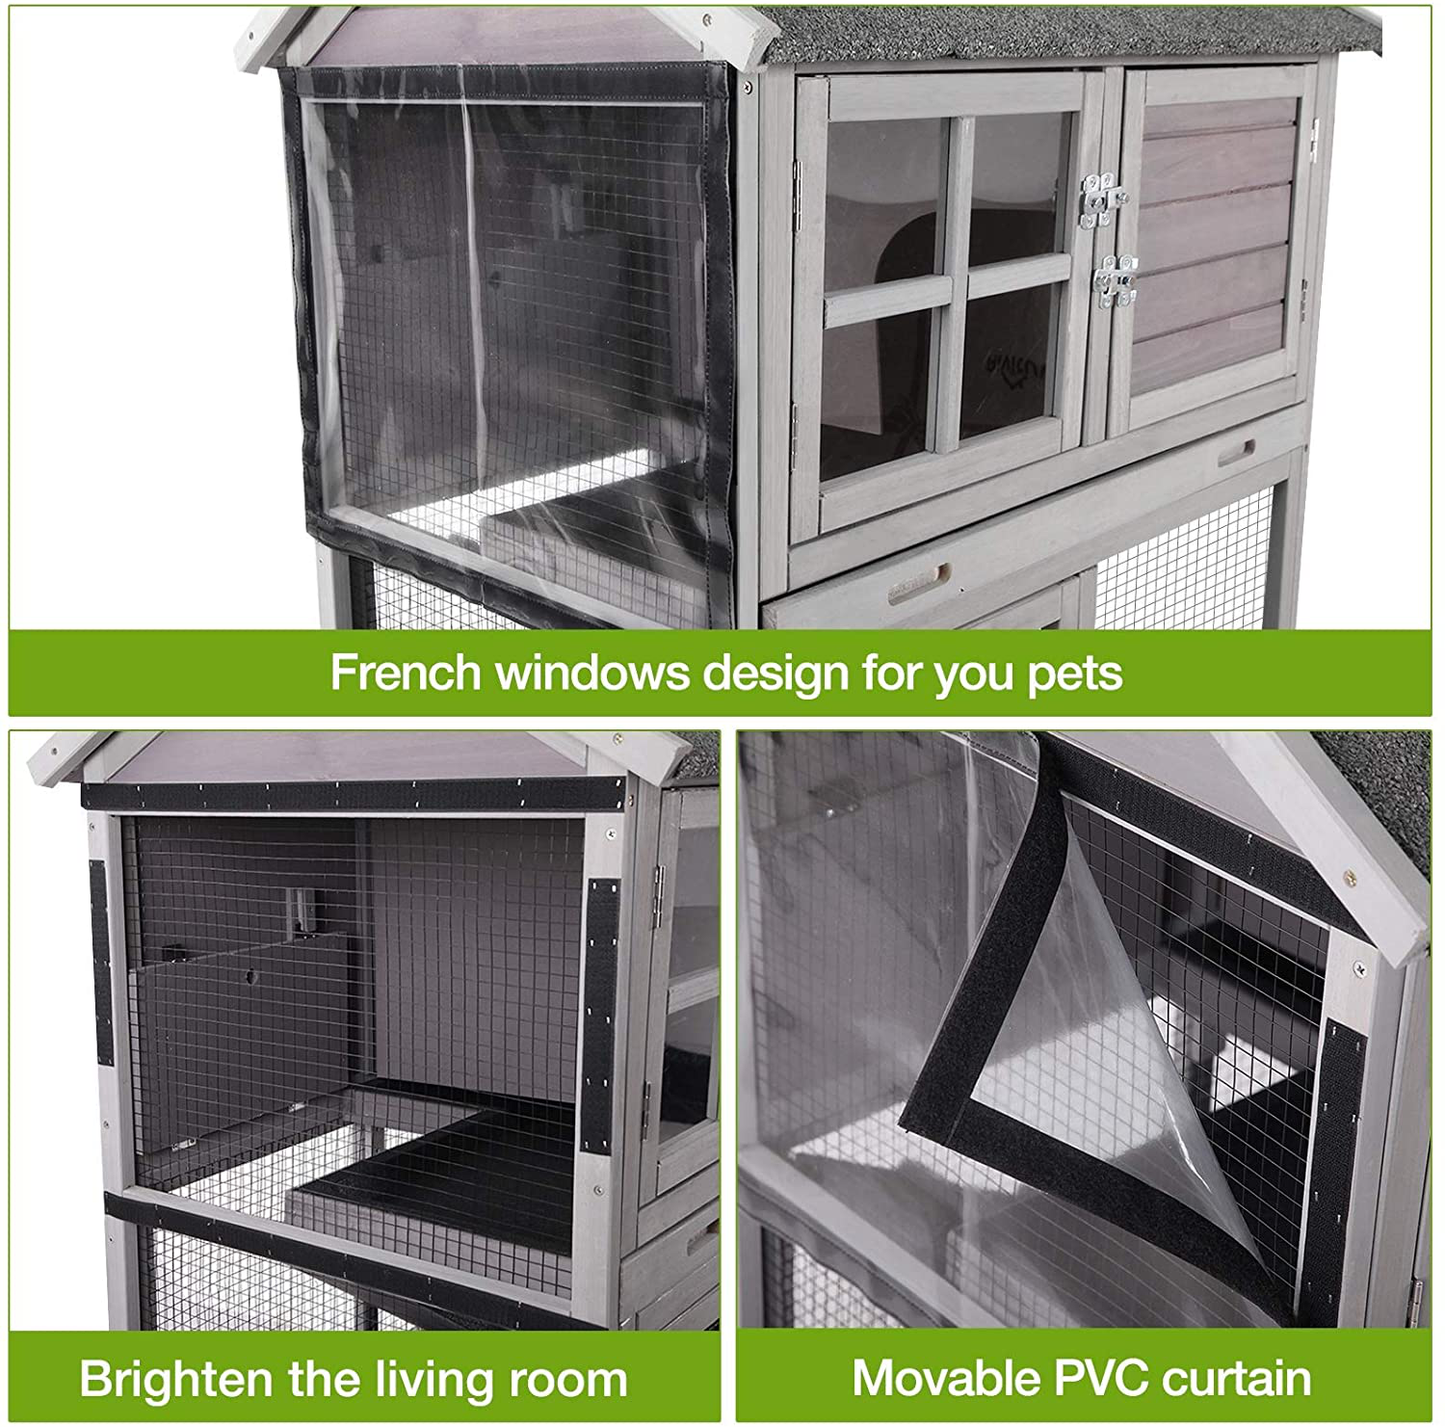 Rabbit Hutch Indoor Rabbit Cage for Small Animals Outdoor Bunny Cage with Movable Wire Netting, Guinea Pig Habitat on Wheels,Pull Out Leak Proof Tray (Grey+Camel) Animals & Pet Supplies > Pet Supplies > Small Animal Supplies > Small Animal Habitats & Cages GUTINNEEN   